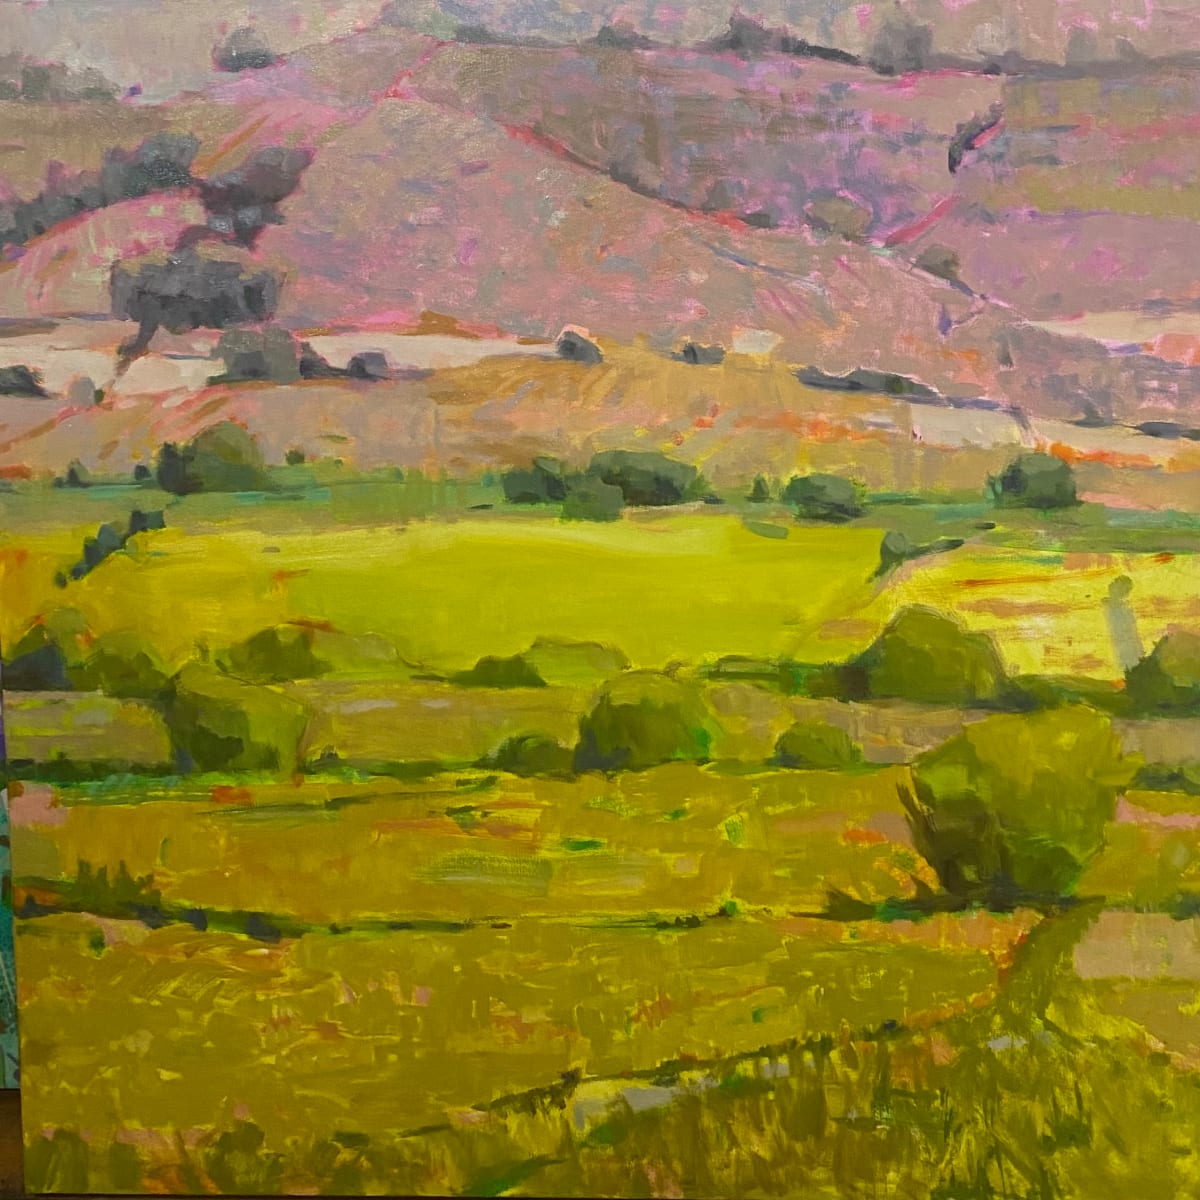 Provence Views by Jean Lee Cauthen  Image: Unframed 